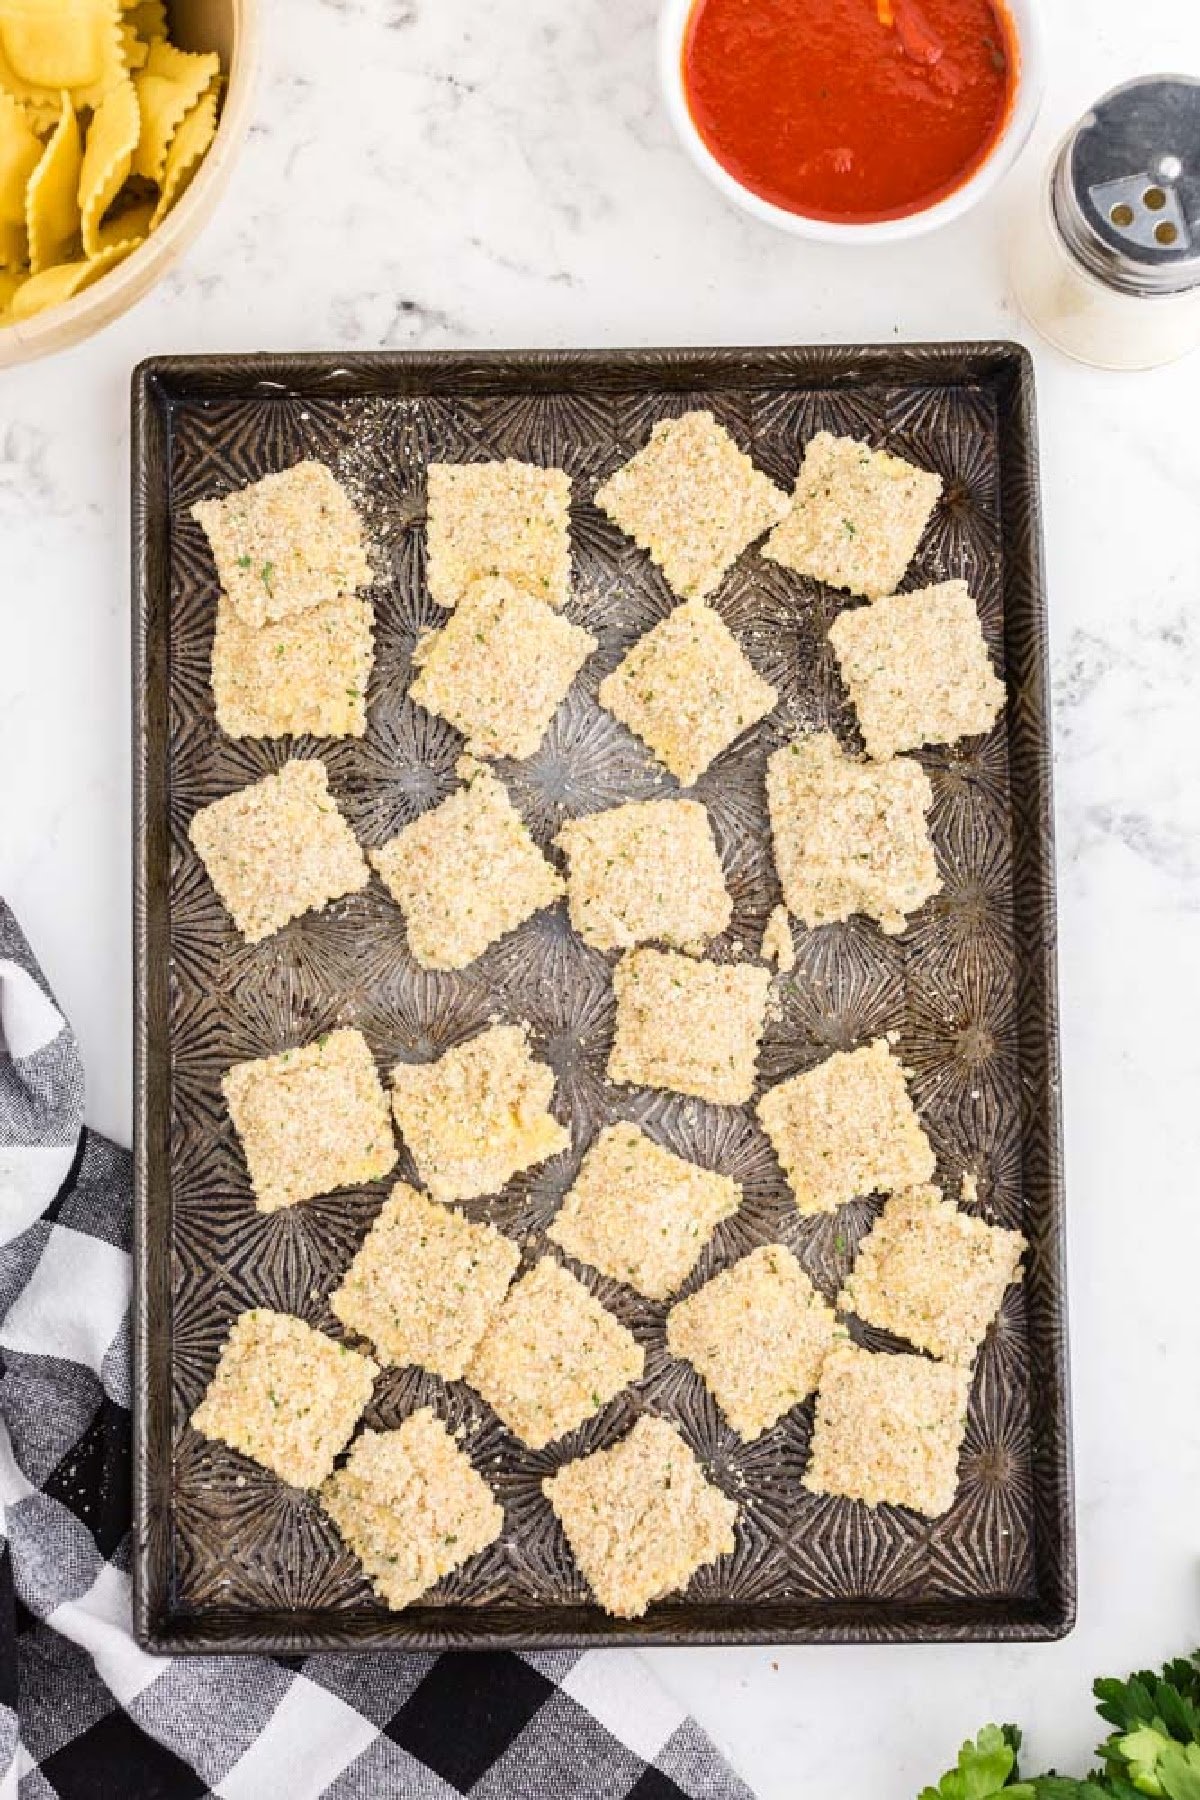 Breaded raviolis layed out on a cookie sheet.